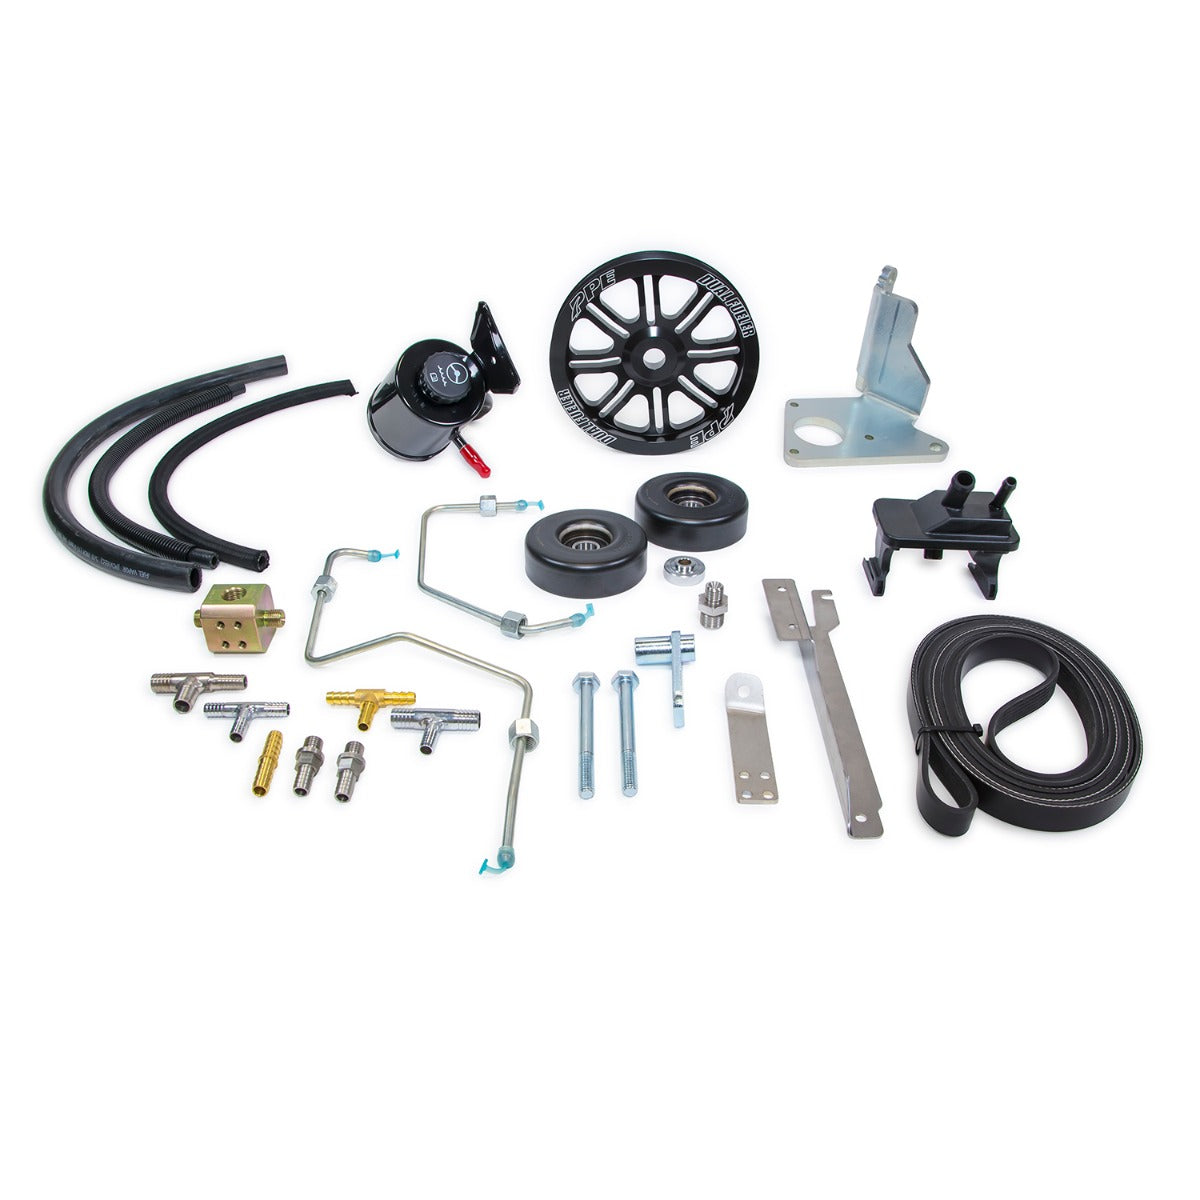 PPE Diesel 2011-2016 GM 6.6L Duramax Dual Fueler Installation Kit without pump (Built To Order) 113067200